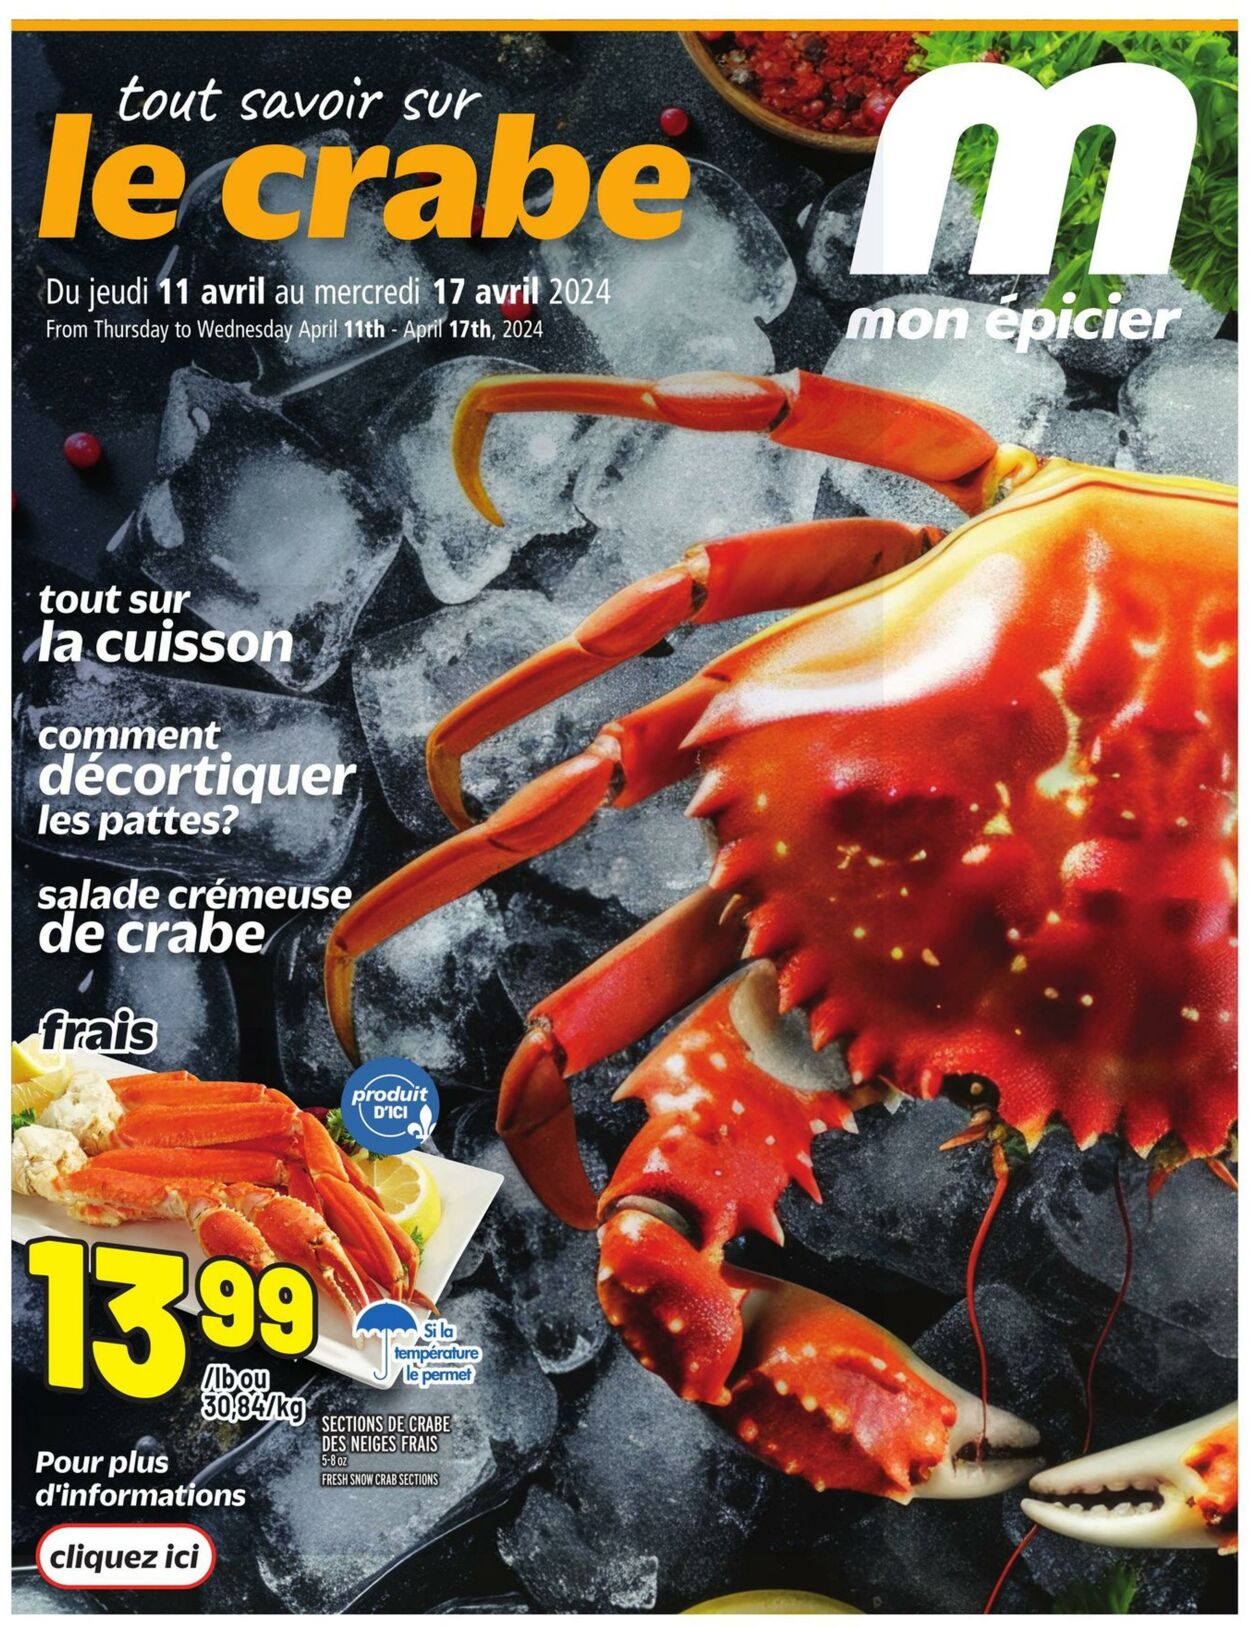 Flyer Metro - Everything You Need to Know About Crab - Metro Plus 11 Apr 2024 - 17 Apr 2024